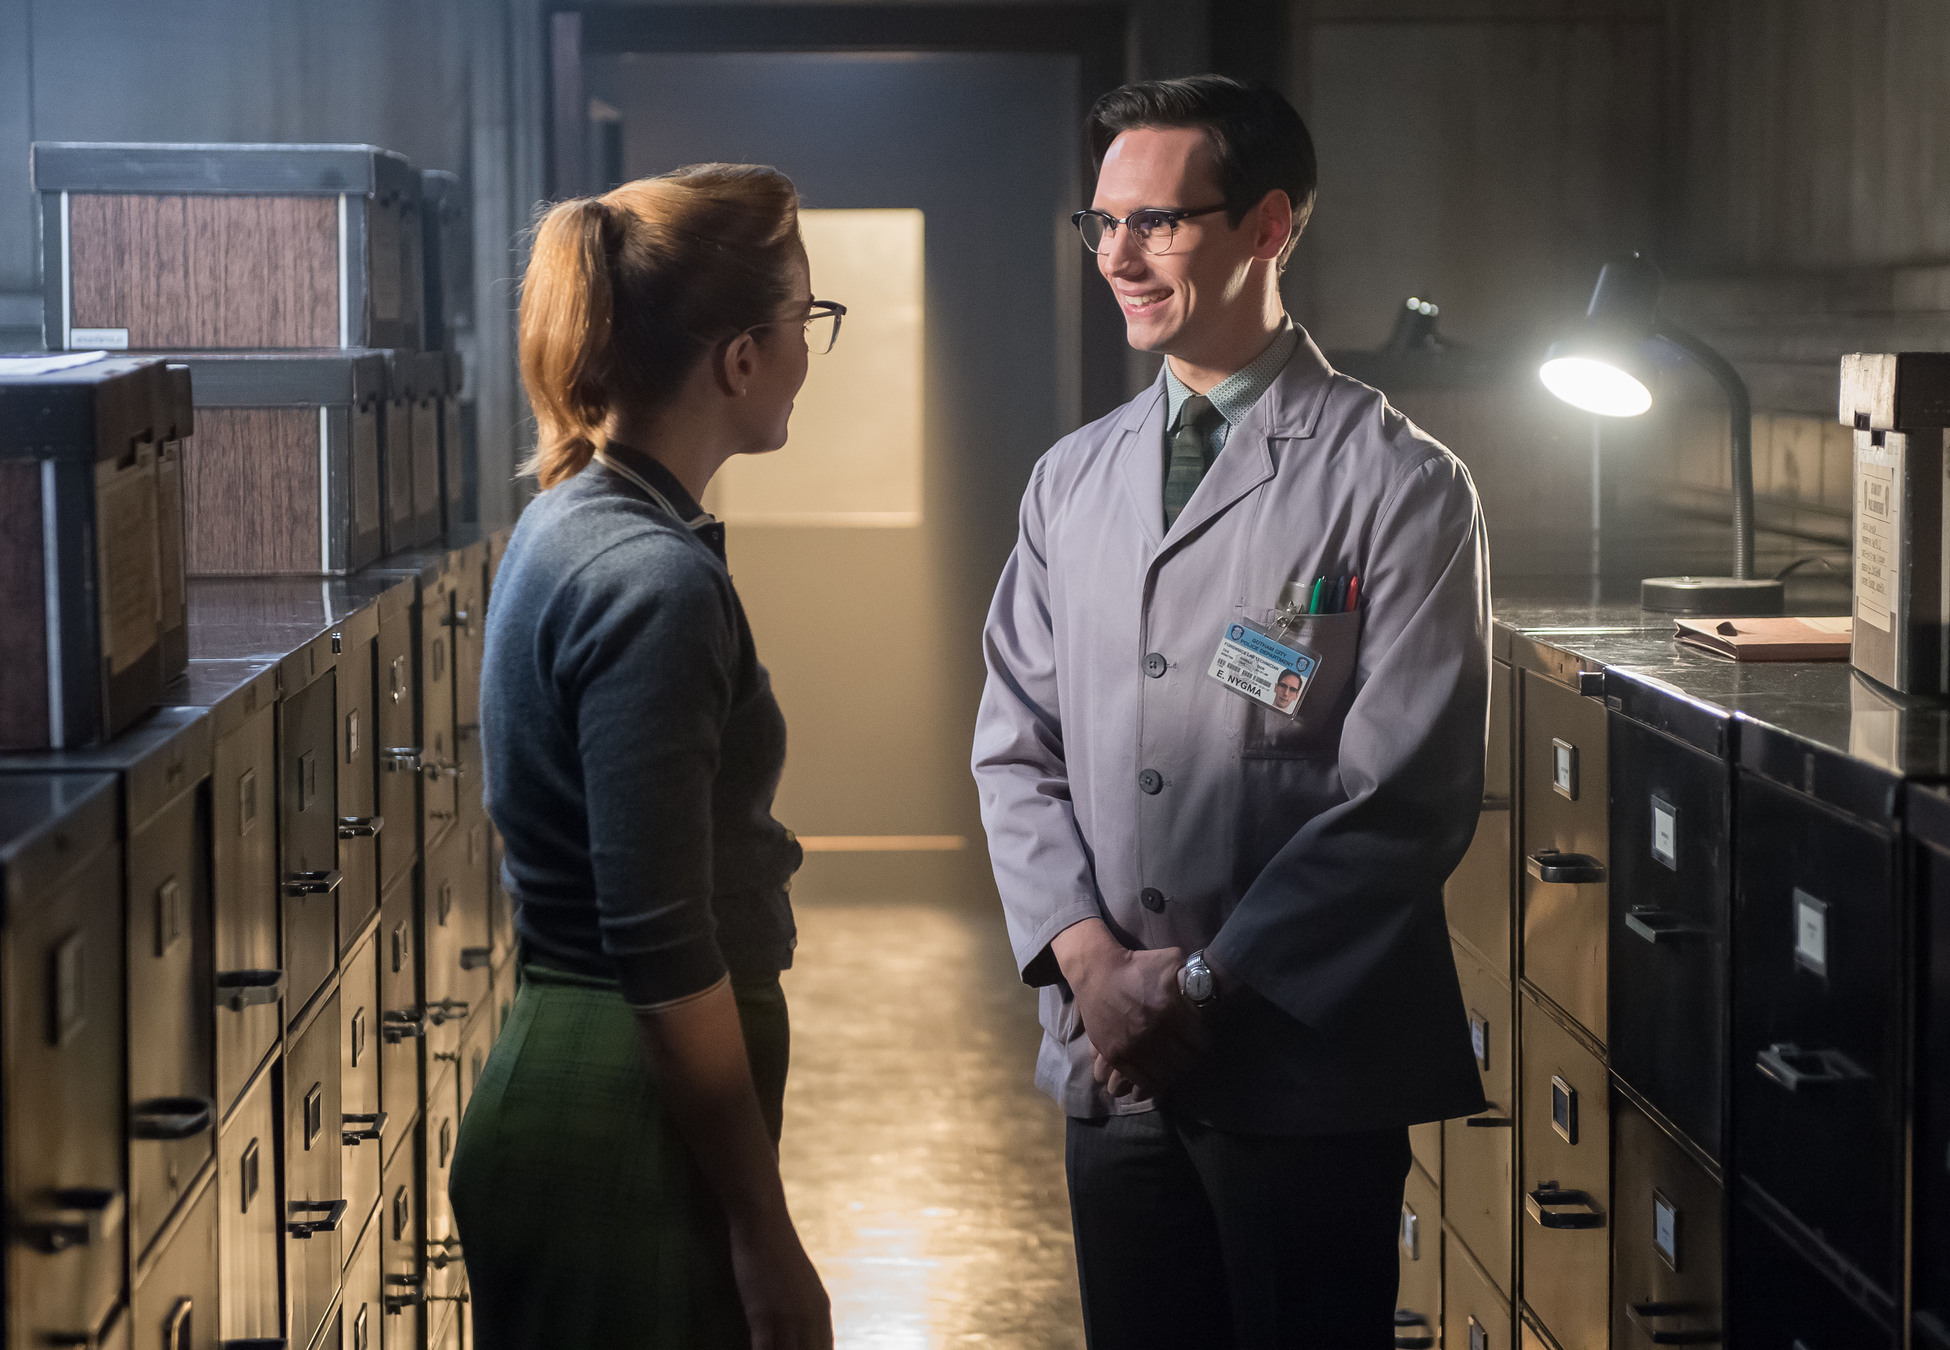 GOTHAM: Edward Nygma (Cory Michael Smith, R) flirts with co-worker Kristin Kringle (guest star Chelsea Spack, L) in the "What The Little Bird Told Him" episode of GOTHAM airing Monday, Jan. 19 (8:00-9:00 PM ET/PT) on FOX. Â©2014 Fox Broadcasting Co. Cr: Jeff Neumann/FOX